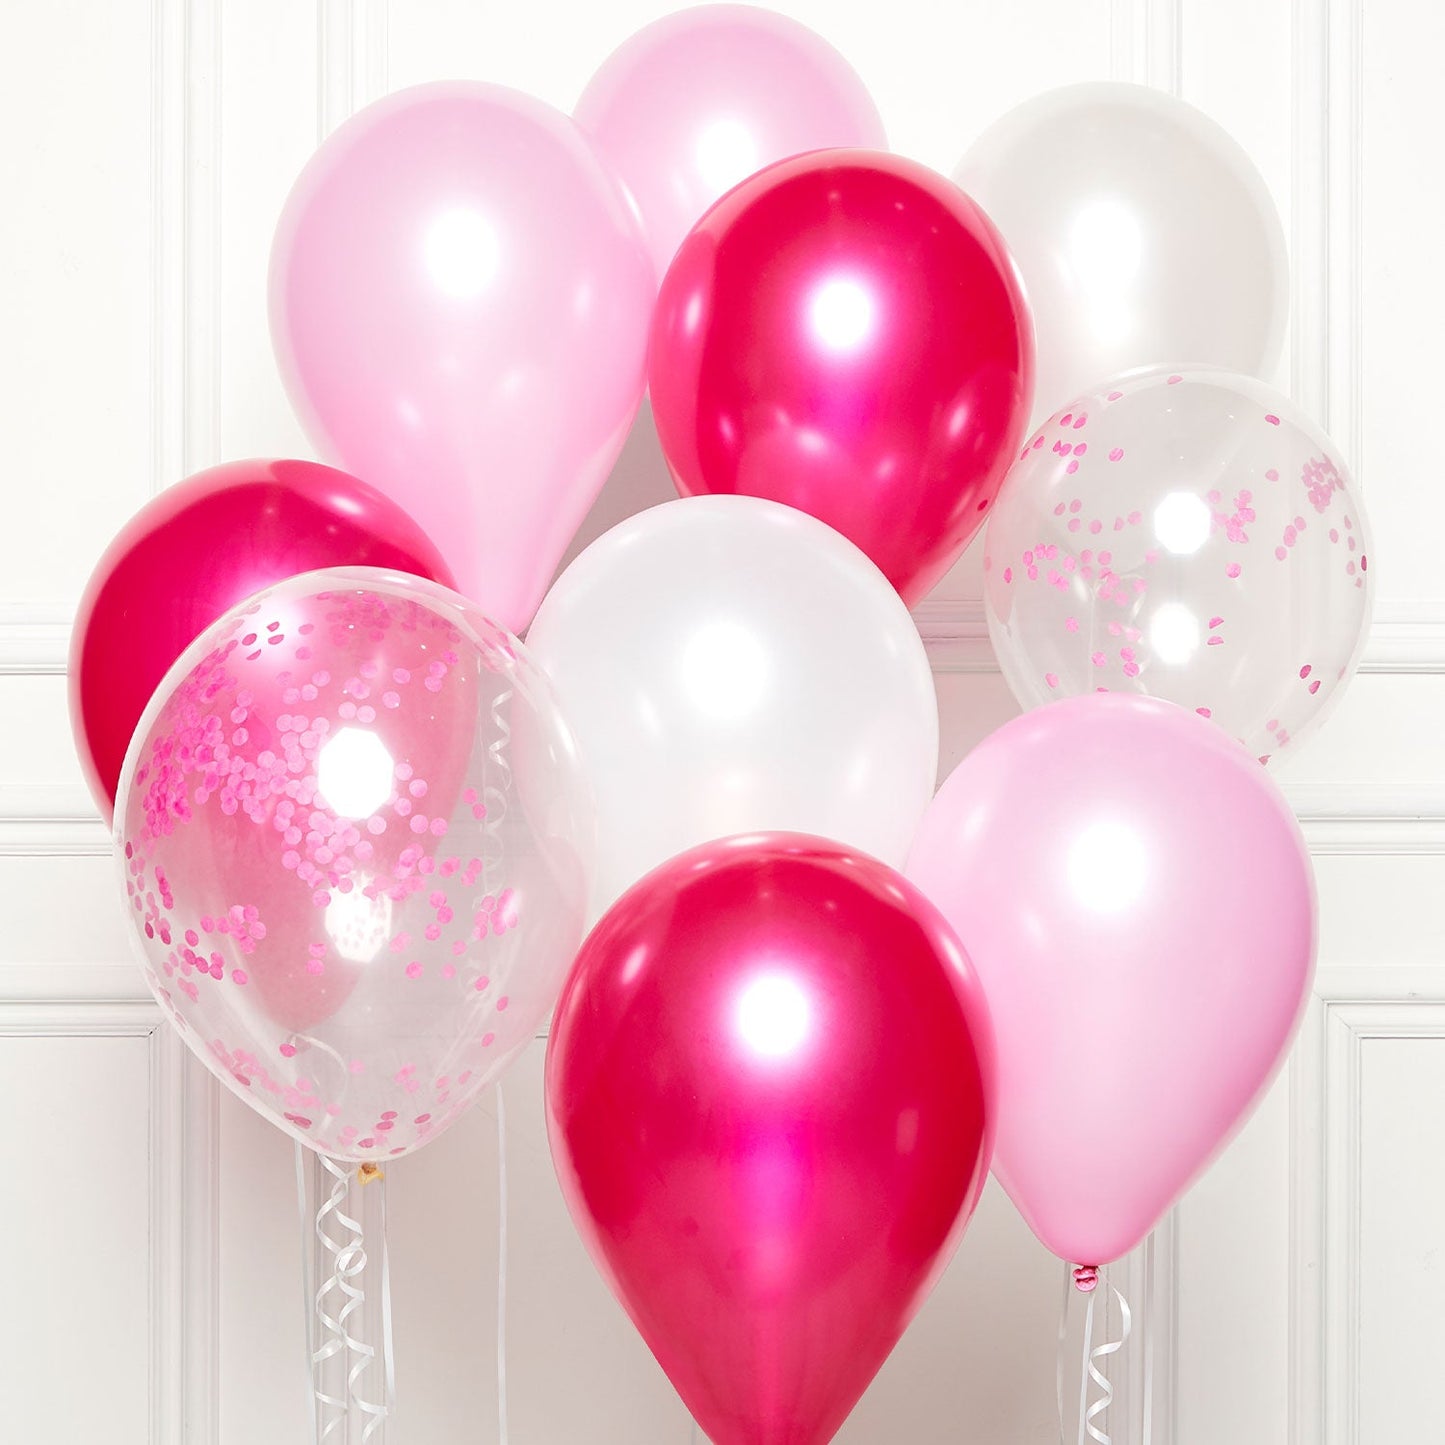 Pink DIY Latex Balloon Kit includes 2 x Clear Confetti Balloons, 3 x Light Pink Pearl Balloons, 3 x Hot Pink Pearl Balloons, 2 x White Pearl Balloons and 1.5m of White Ribbon for each Balloon